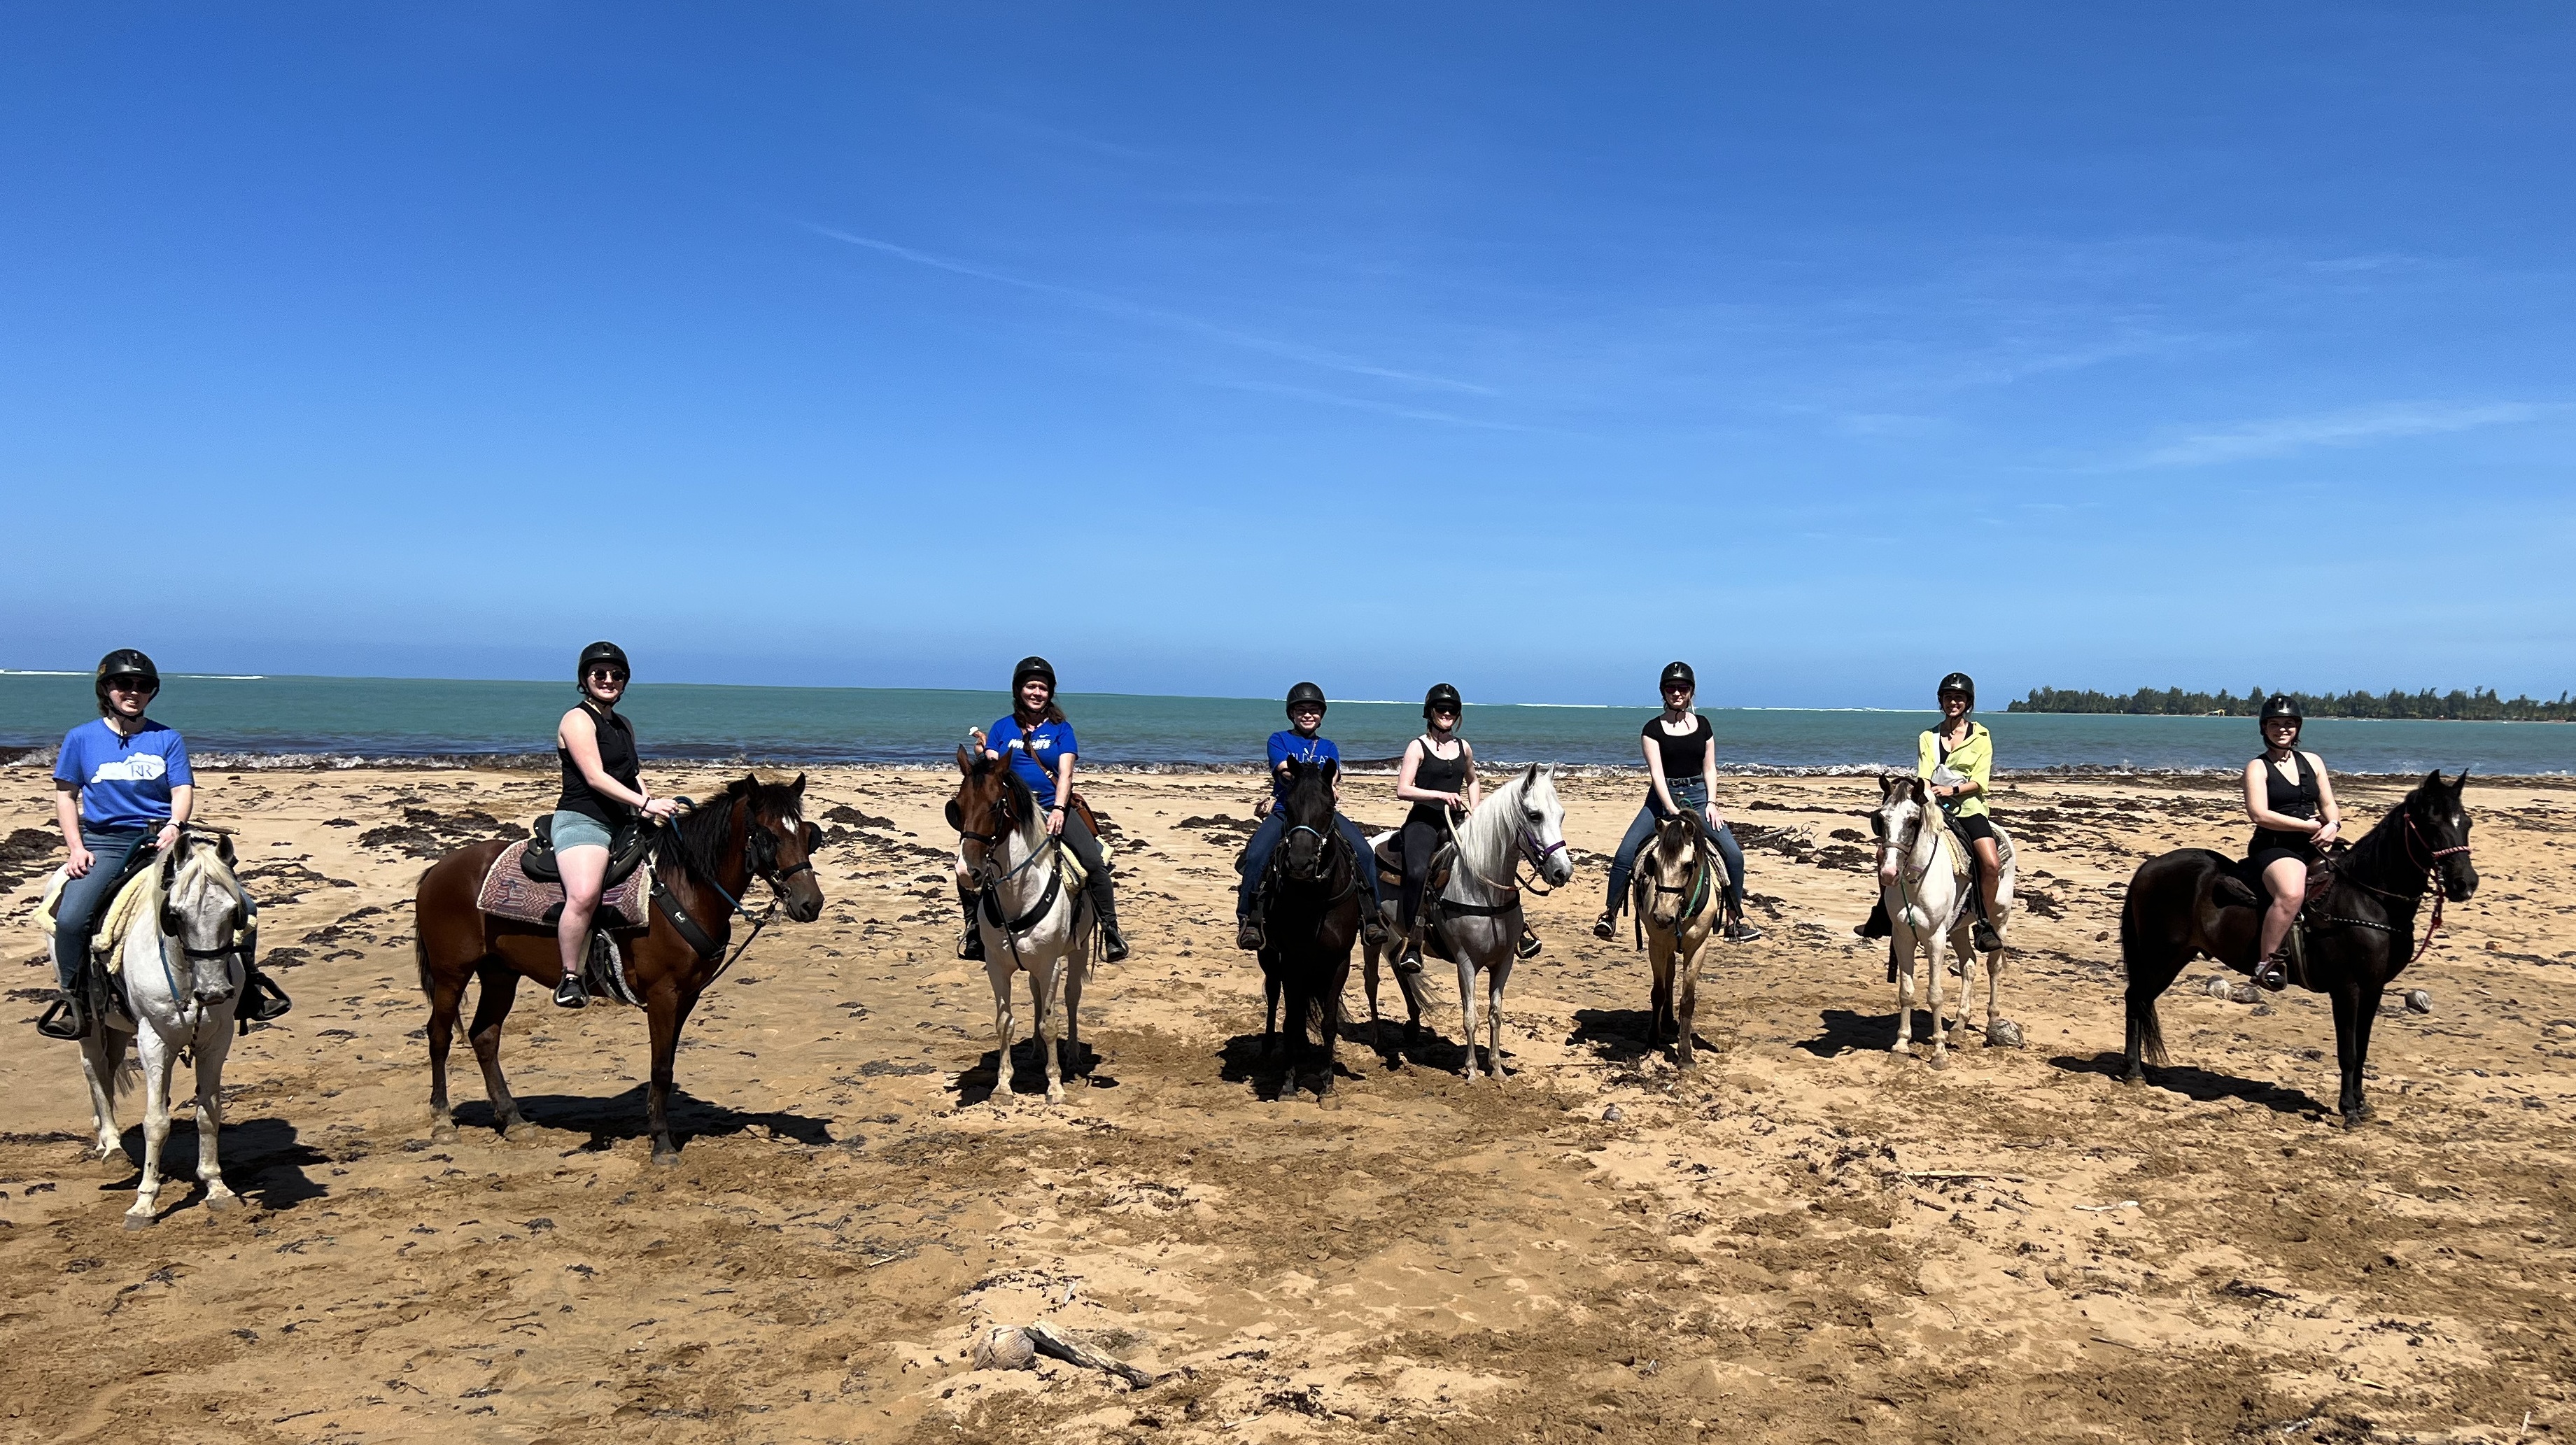 Students riding horses by the sea.